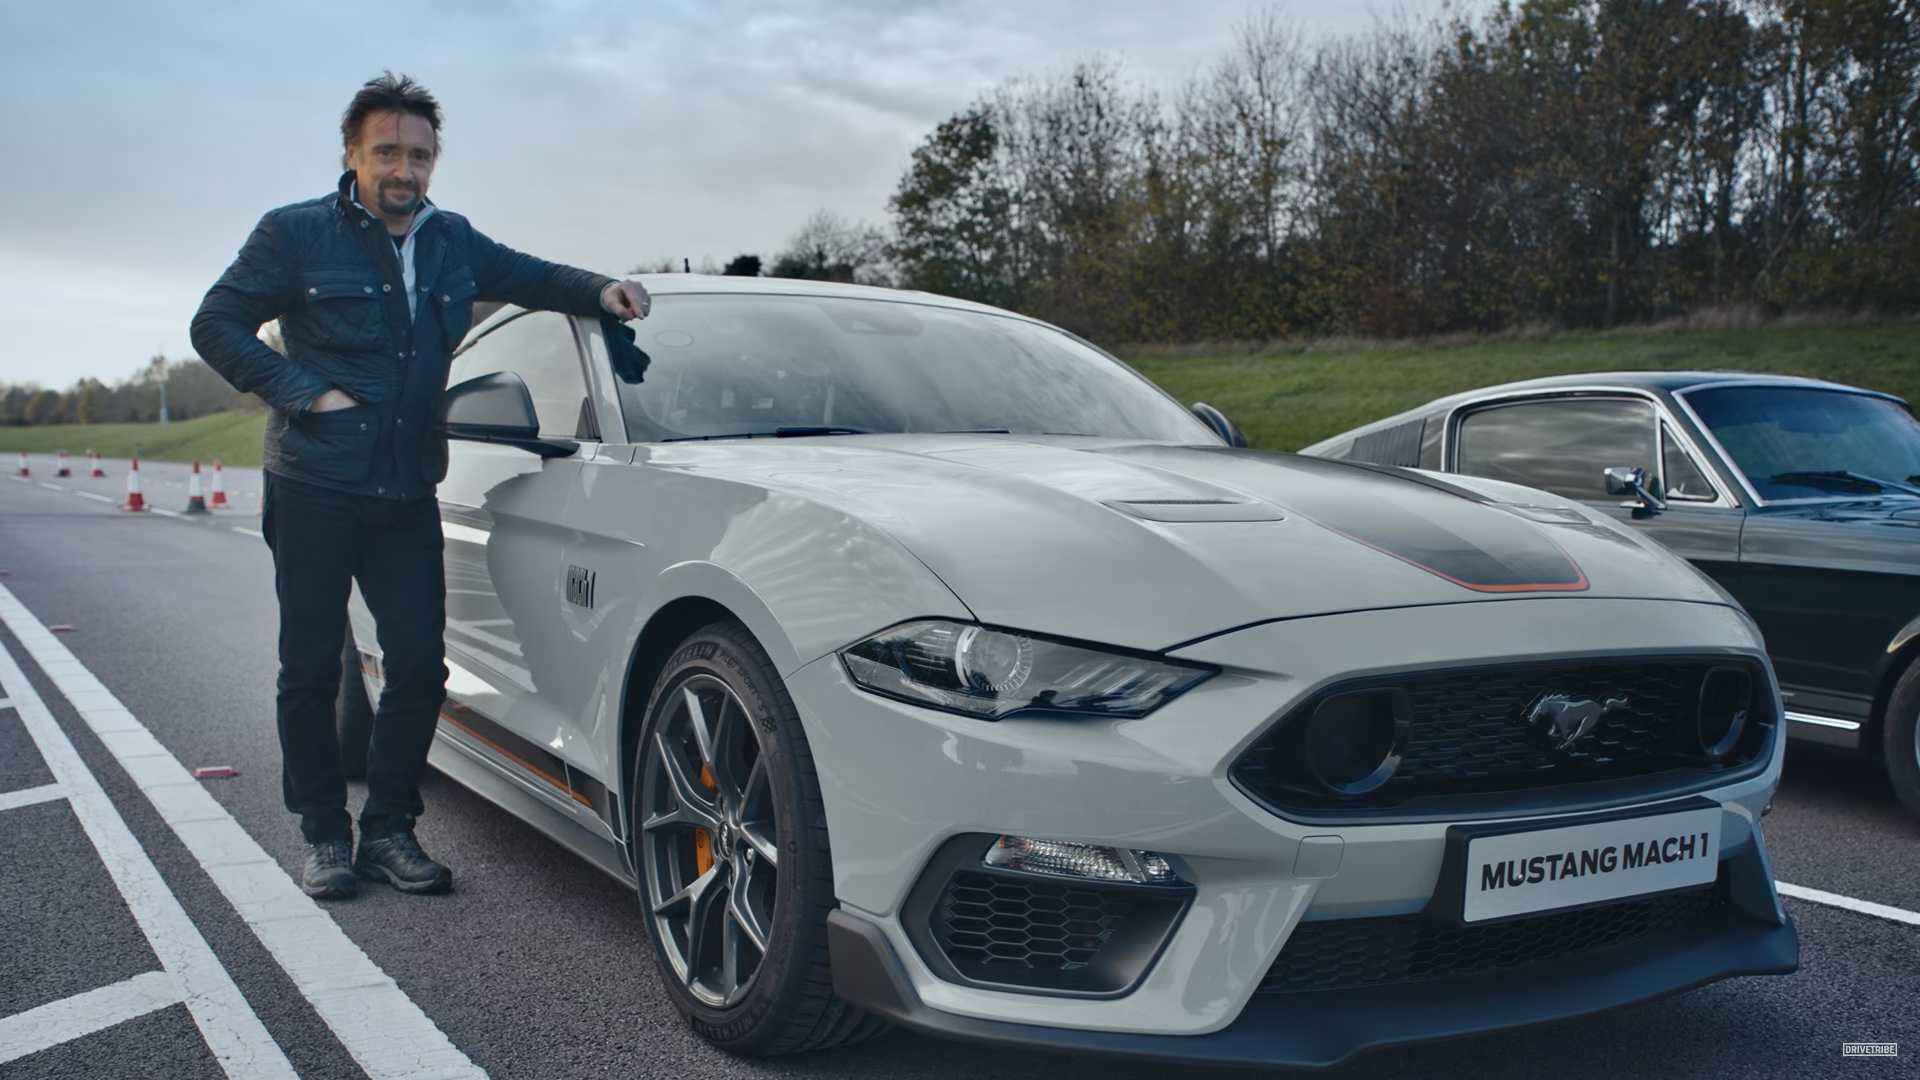 See Richard Hammond Test Drive The New Ford Mustang Mach 1